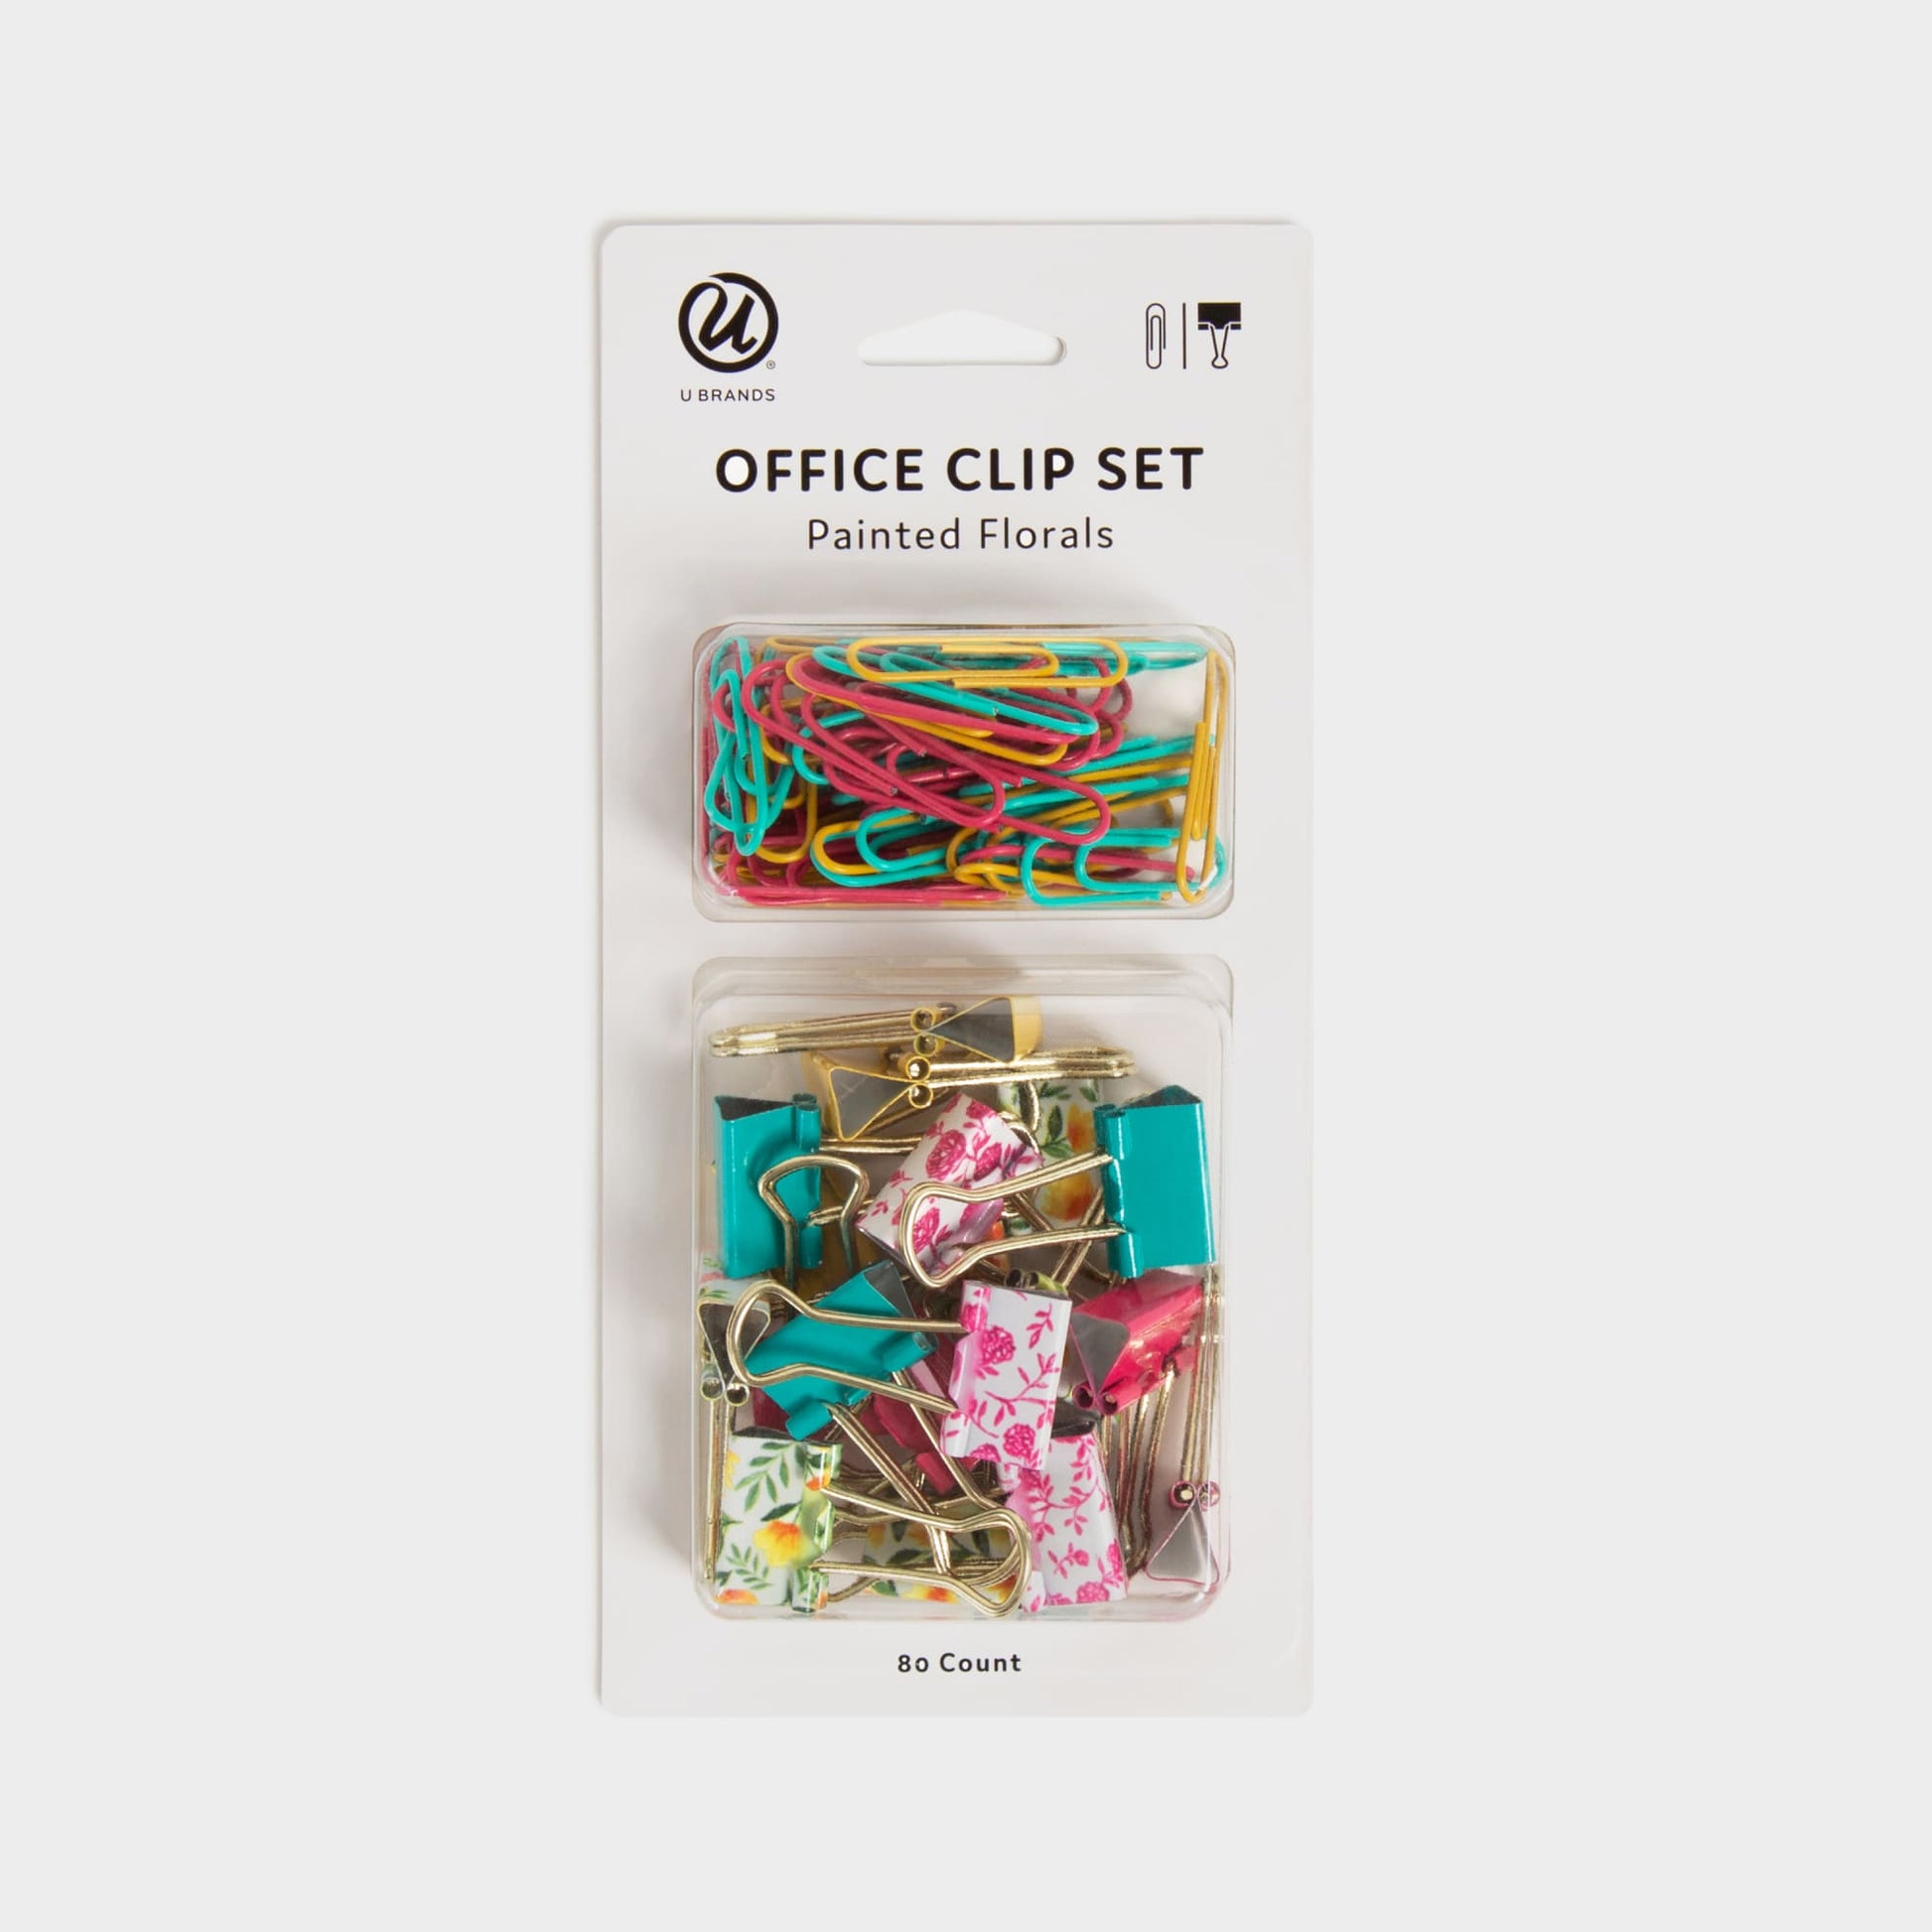 Painted Florals, Mini Office Clip Kit, Assorted Colors, 0.98425" X 0.06834" 